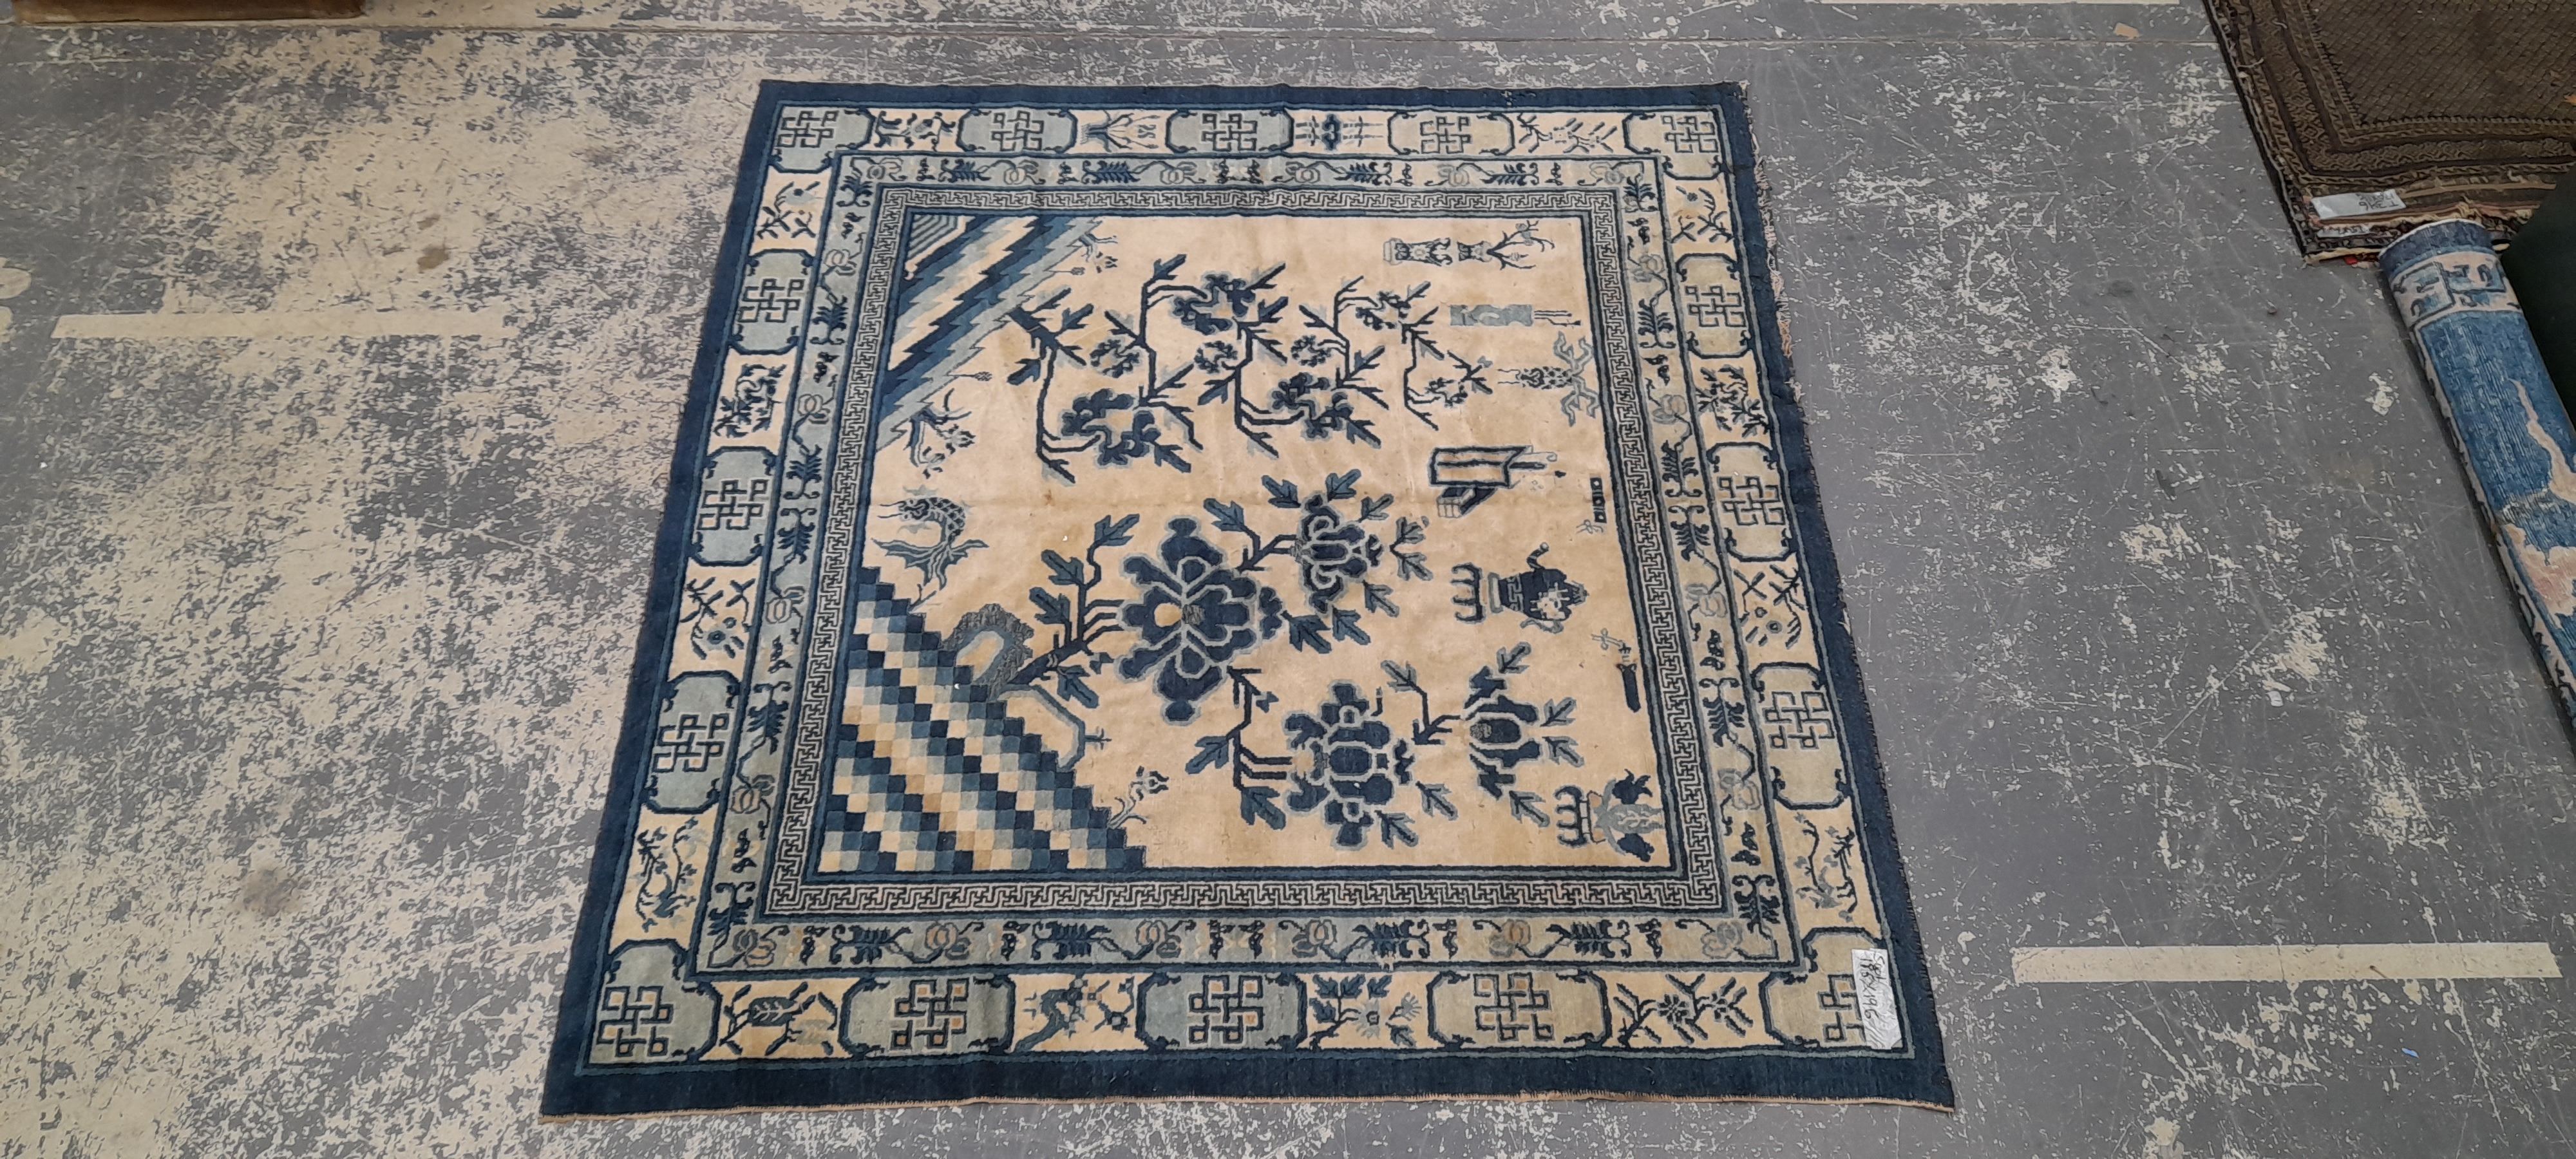 AN ANTIQUE CHINESE SAMPLE RUG 196 x 185 cm